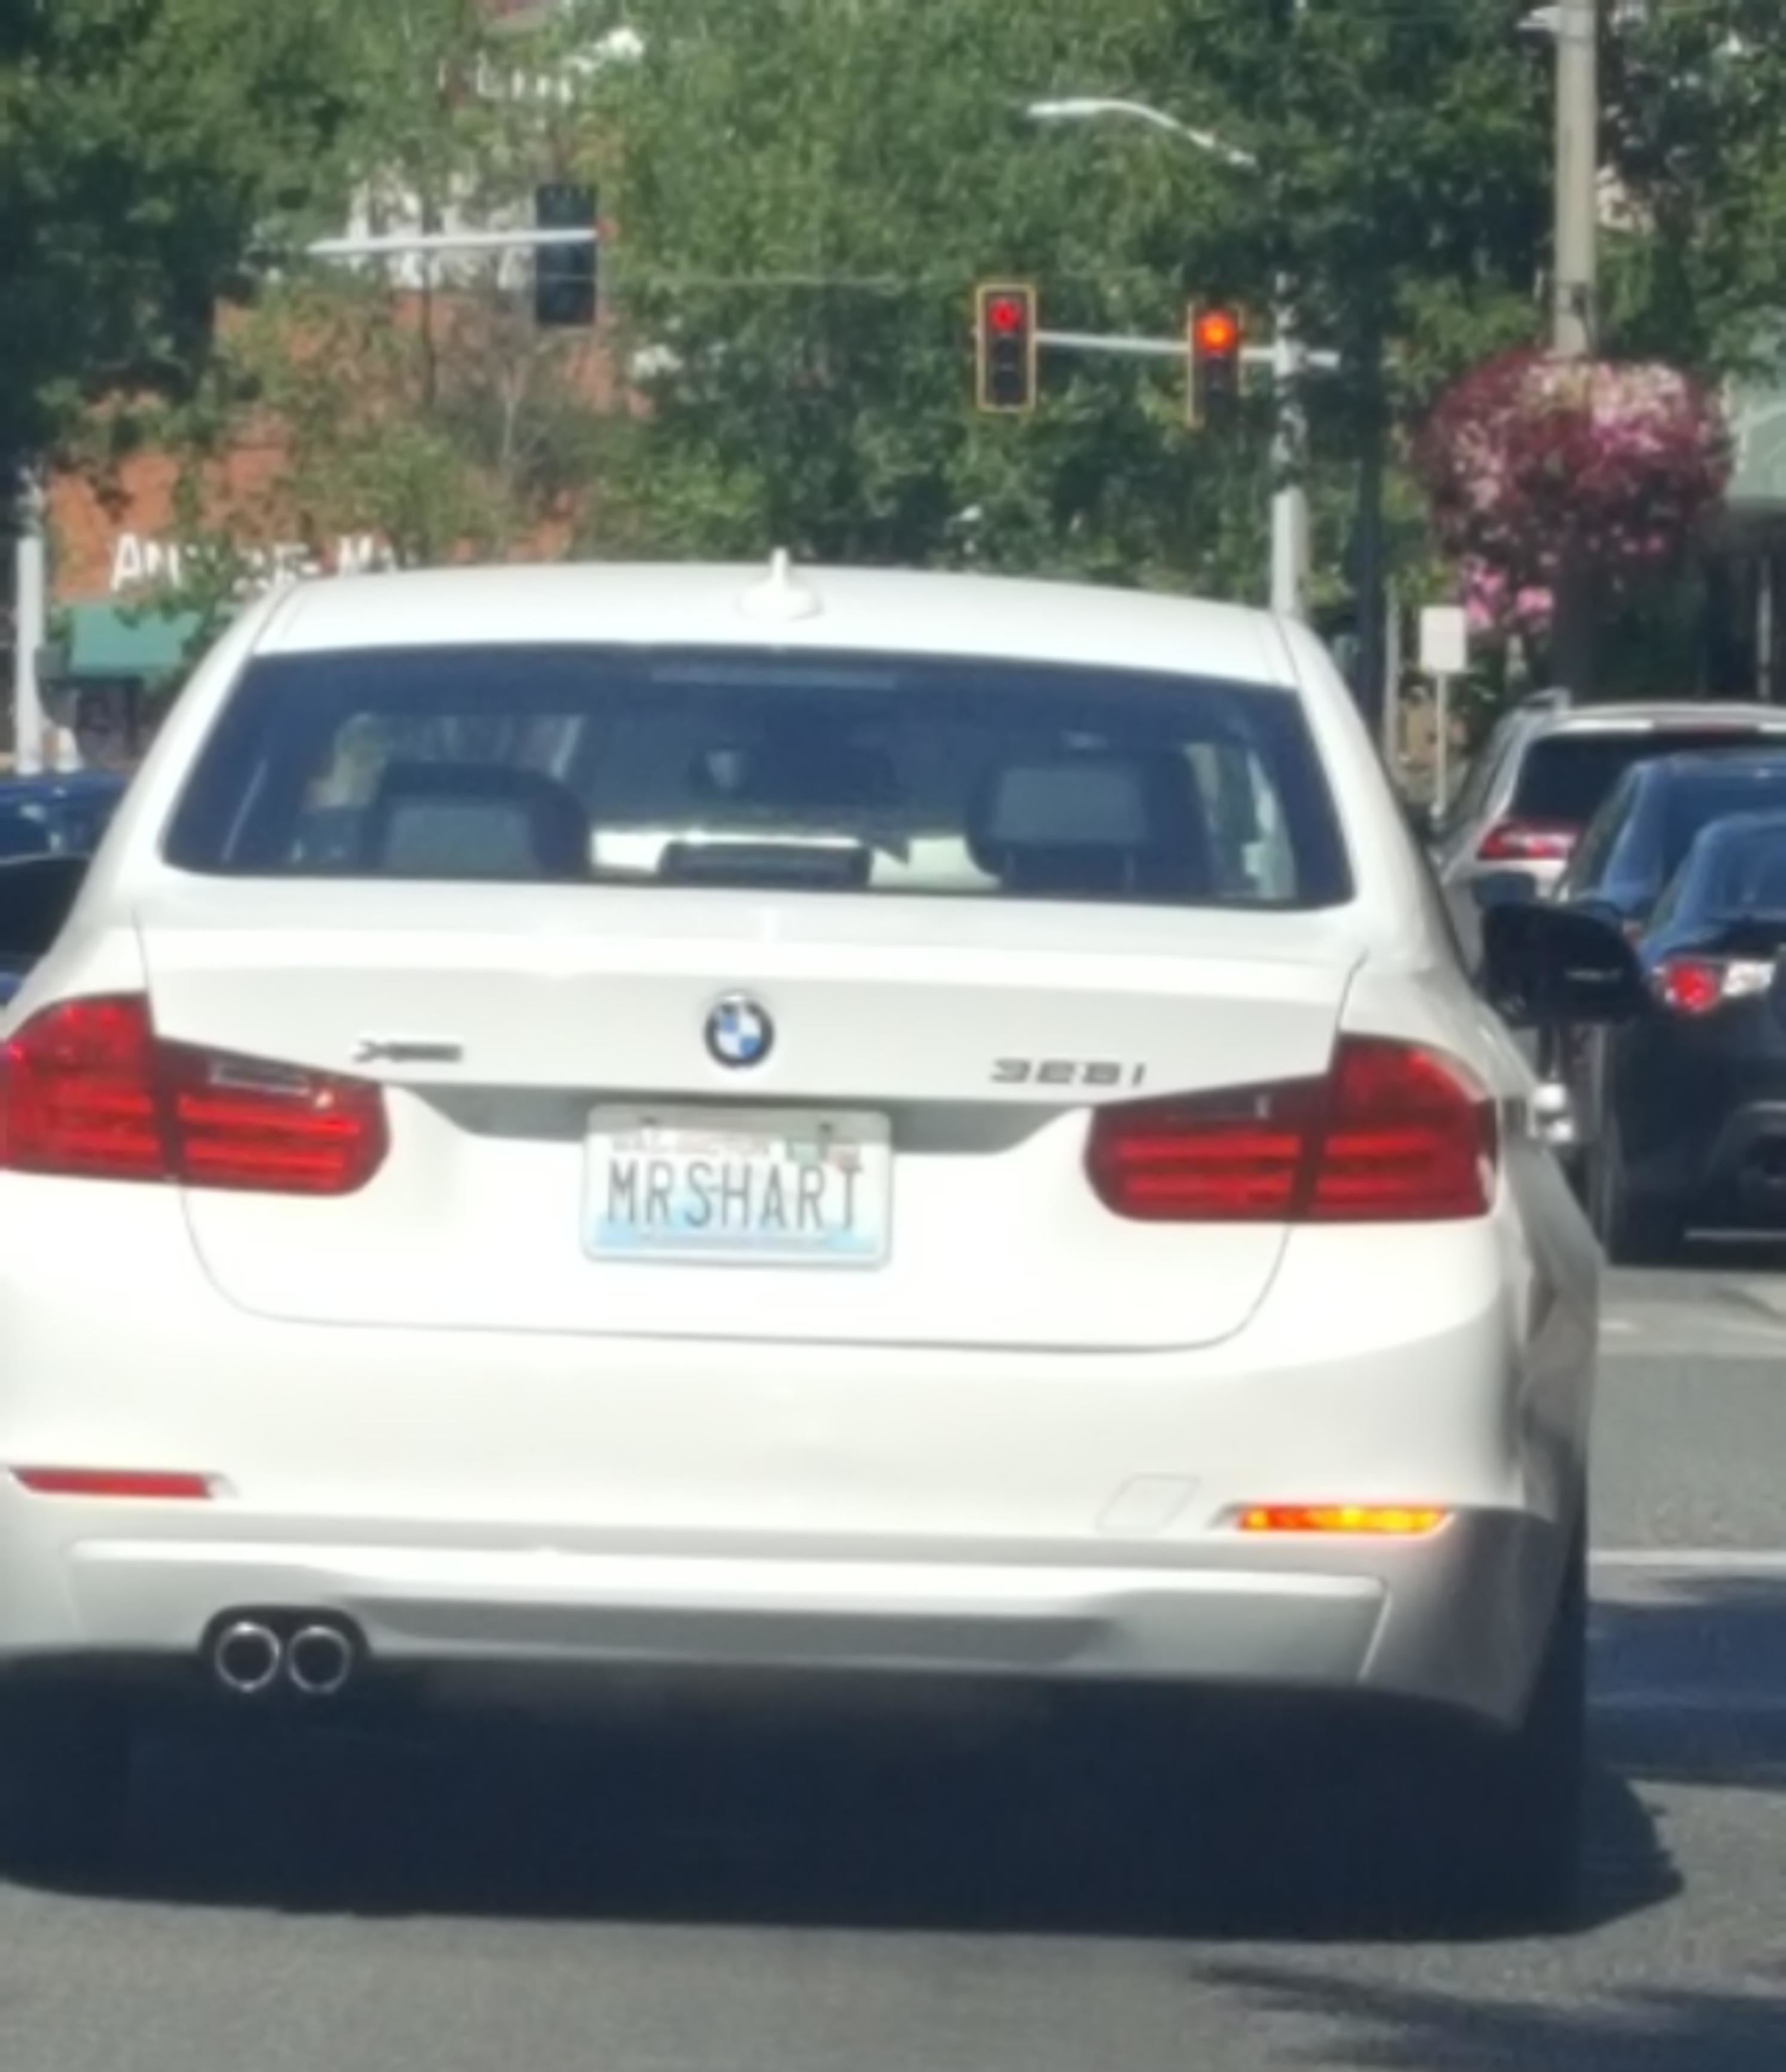 Car with license plate reading &quot;MRSHART&quot;